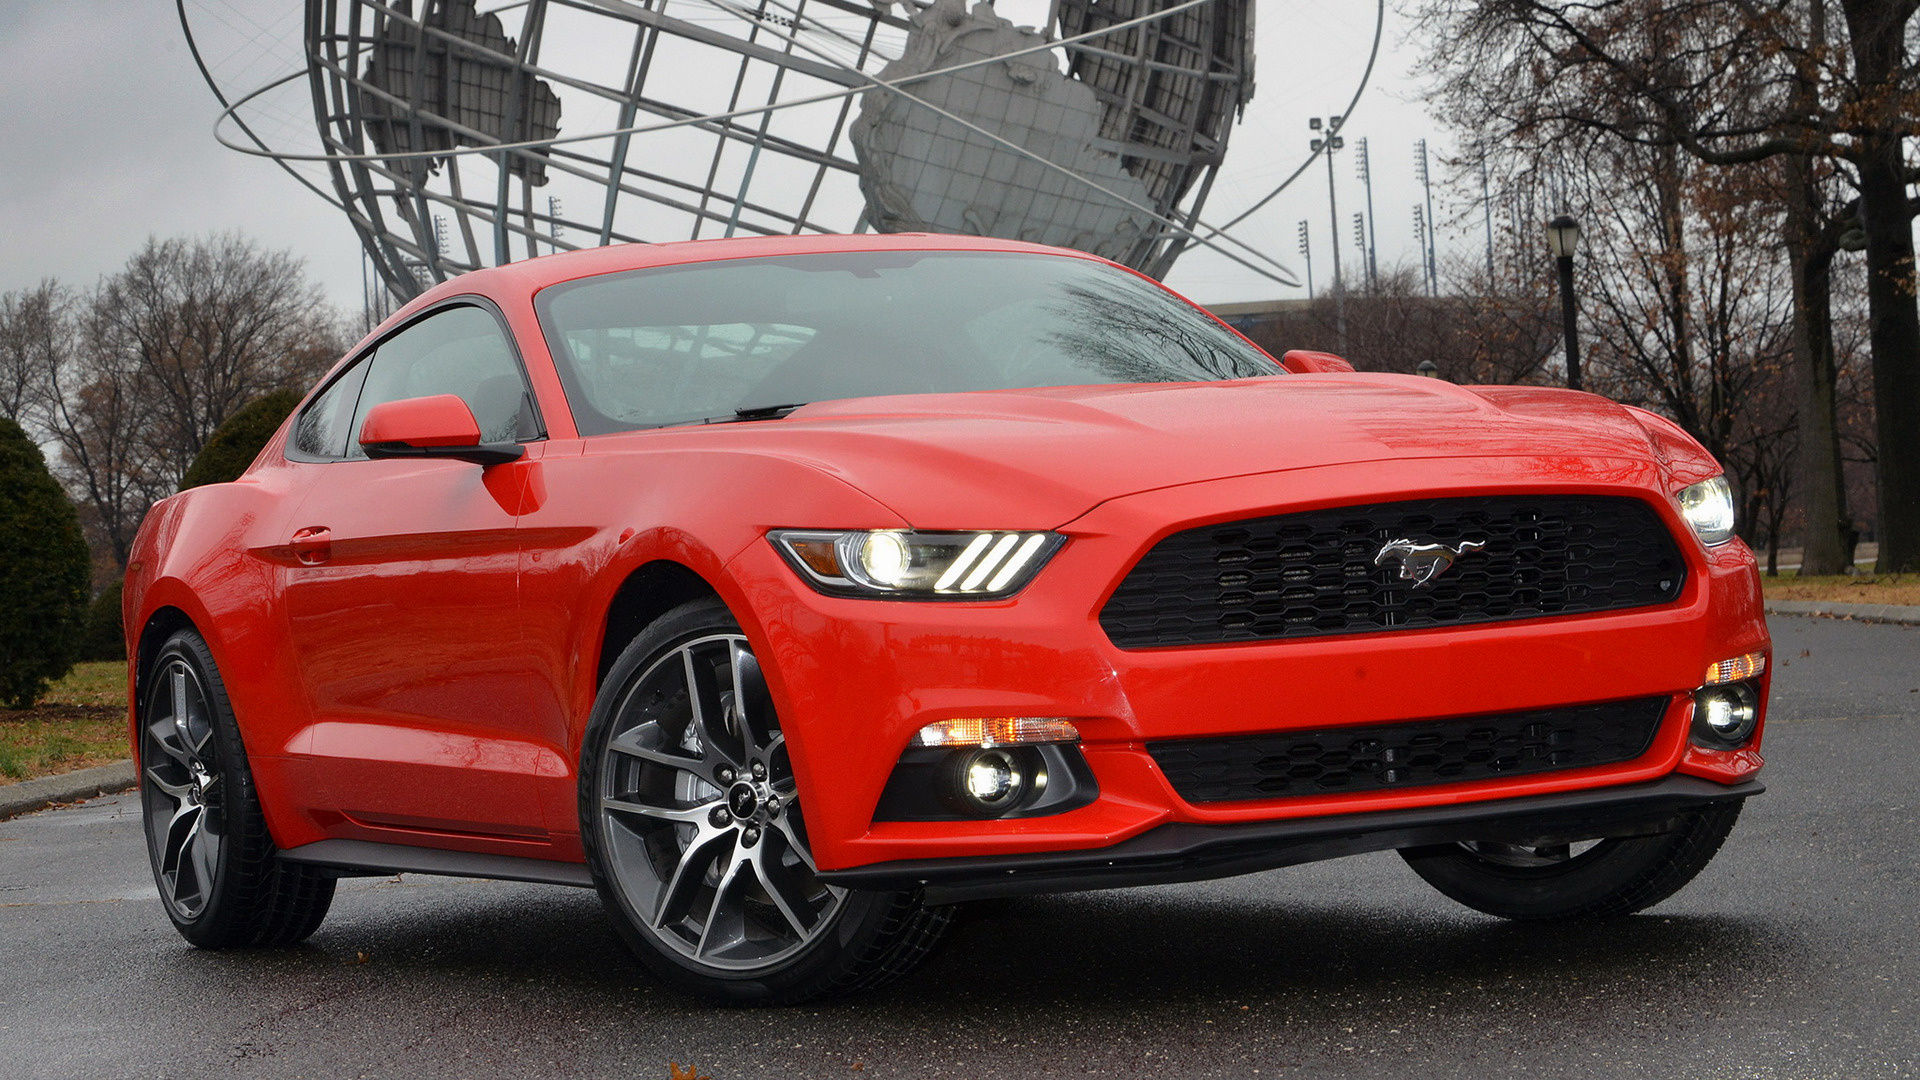 Car Coupe Ford Mustang Muscle Car Red Car 1920x1080